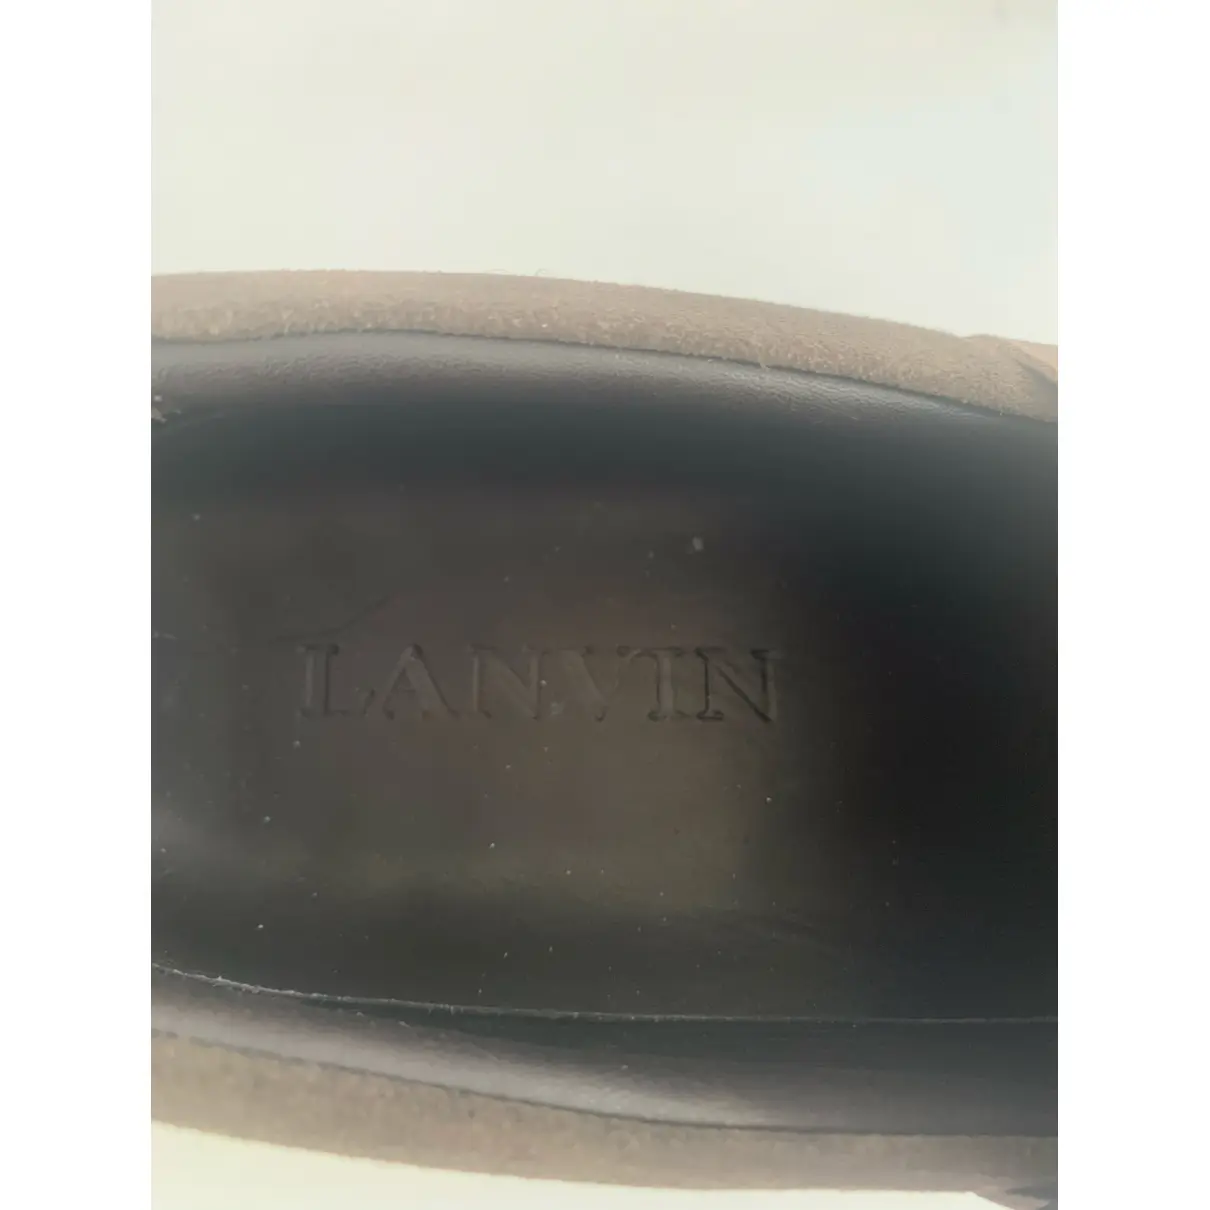 Leather low trainers Lanvin